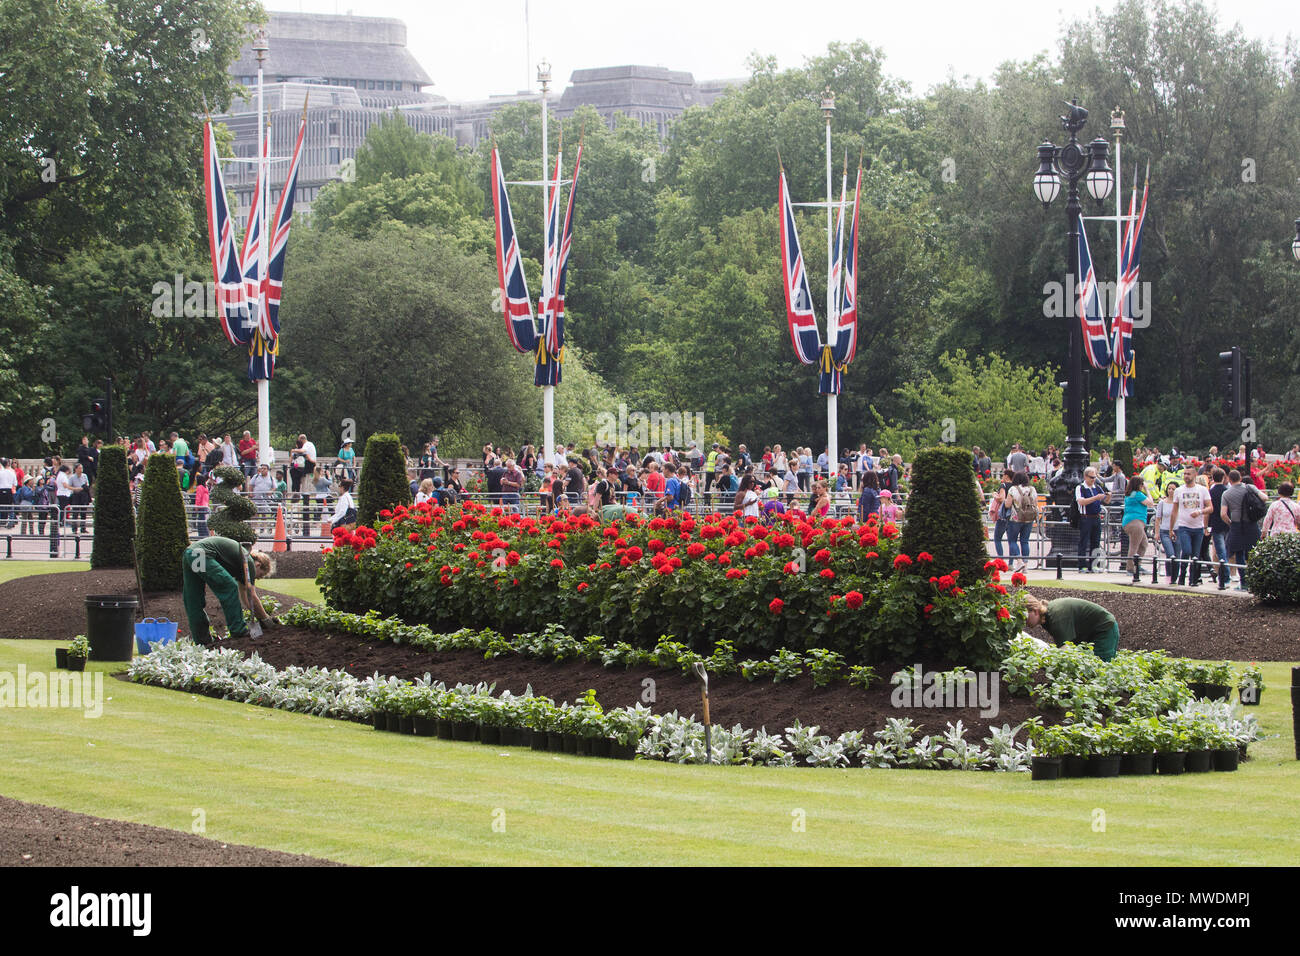 London UK. 1st June 2018. Gardeners plant red geranium flowers in the flower beds opposite Buckingham Palace in preparation for Trooping the colour ceremony to celebrate the Queens Birthday on 9th June Credit: amer ghazzal/Alamy Live News Stock Photo